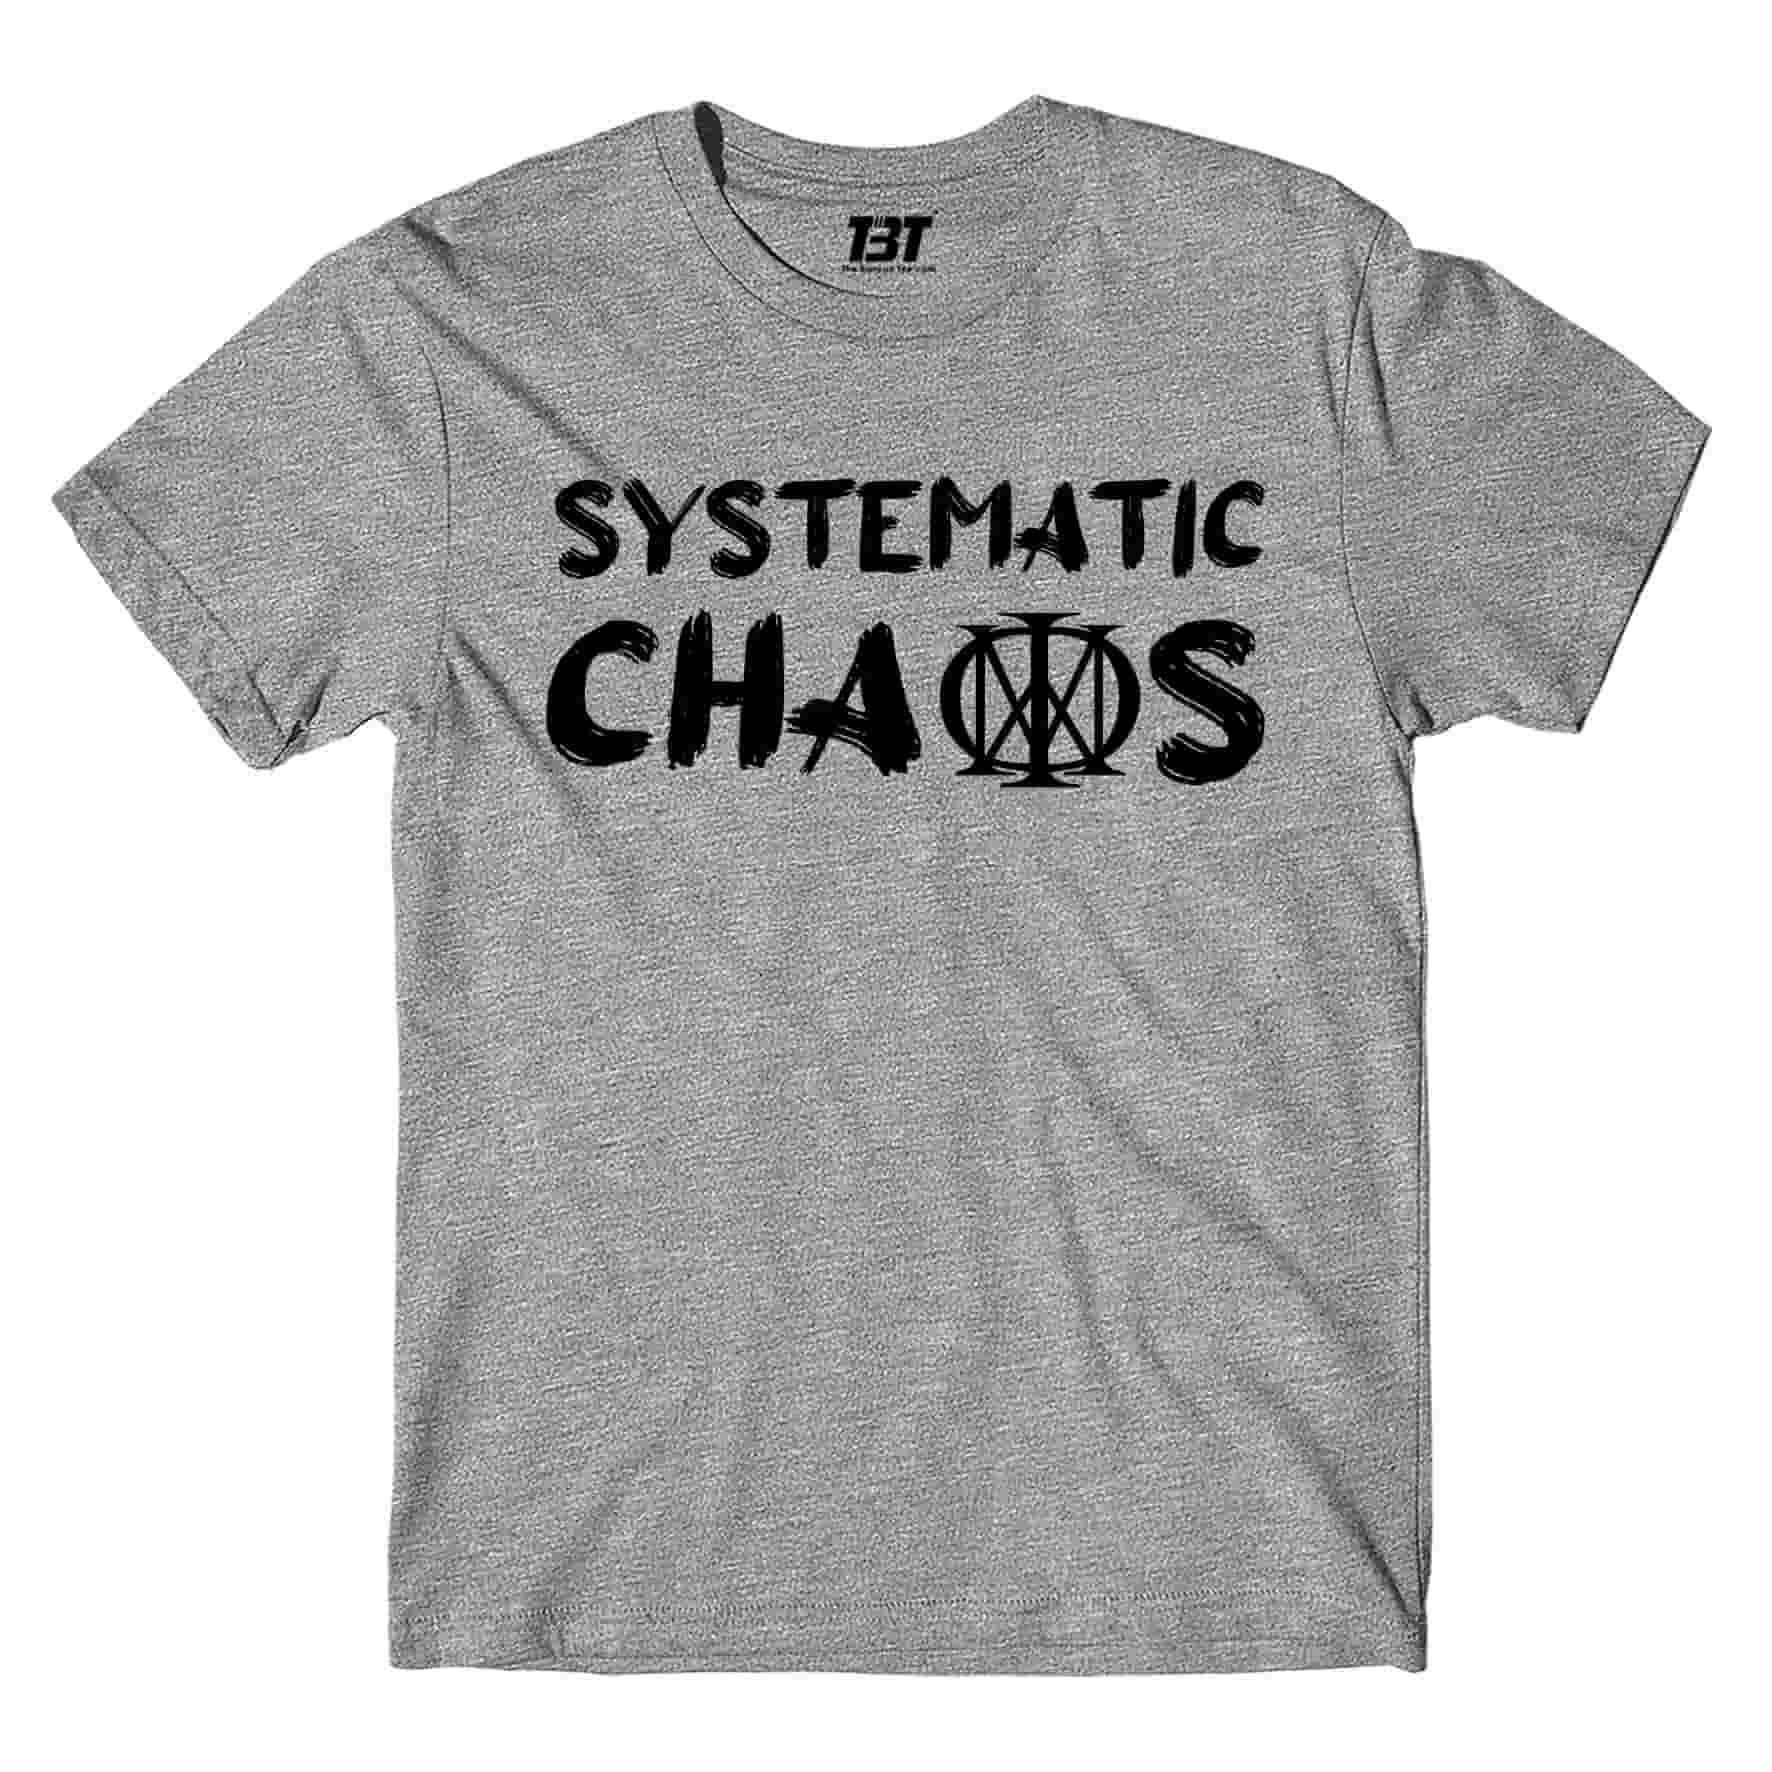 dream theater systematic chaos t-shirt music band buy online usa united states the banyan tee tbt men women girls boys unisex gray